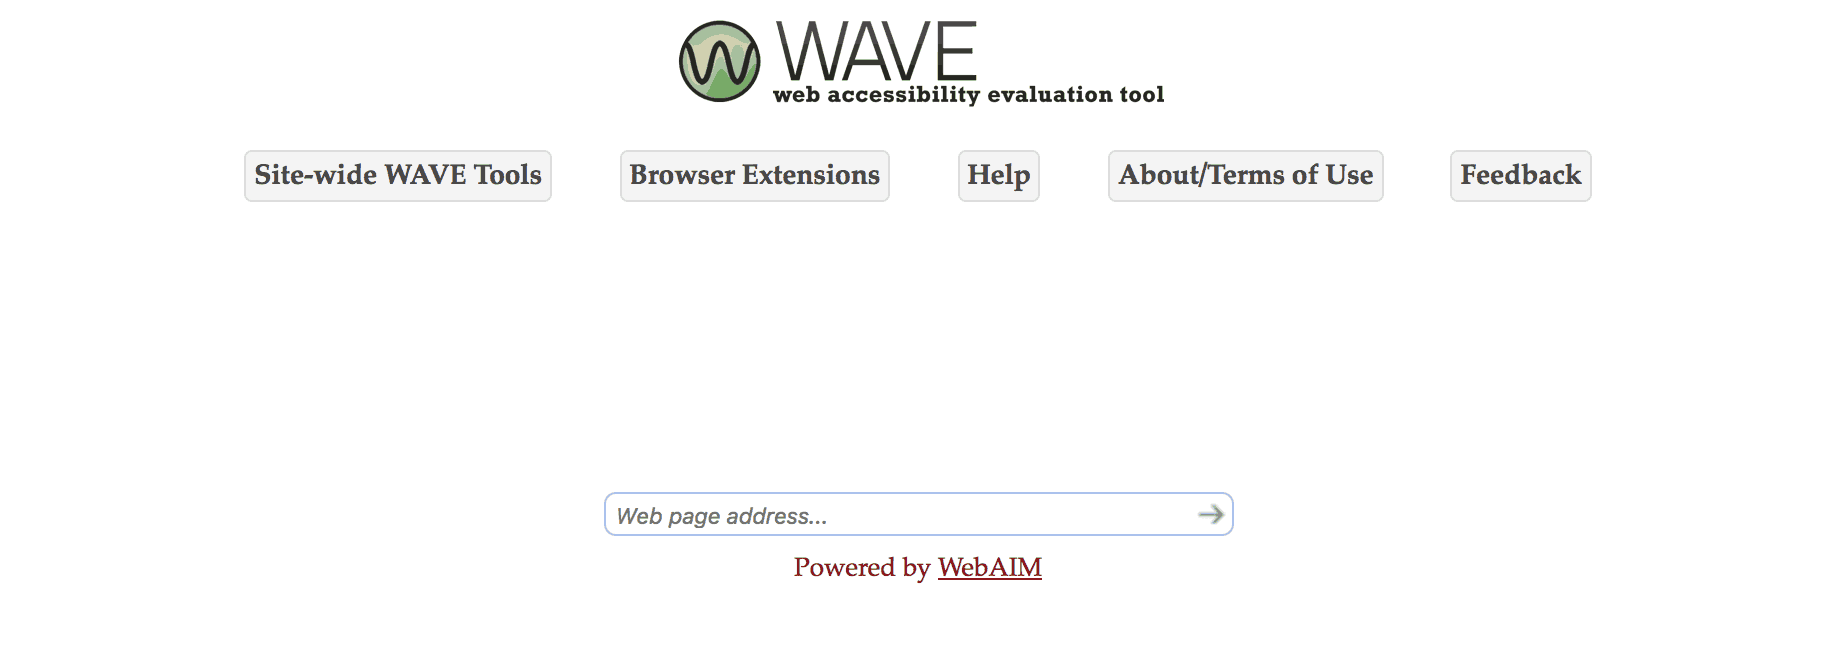 Testing your site's accessibility with WAVE.